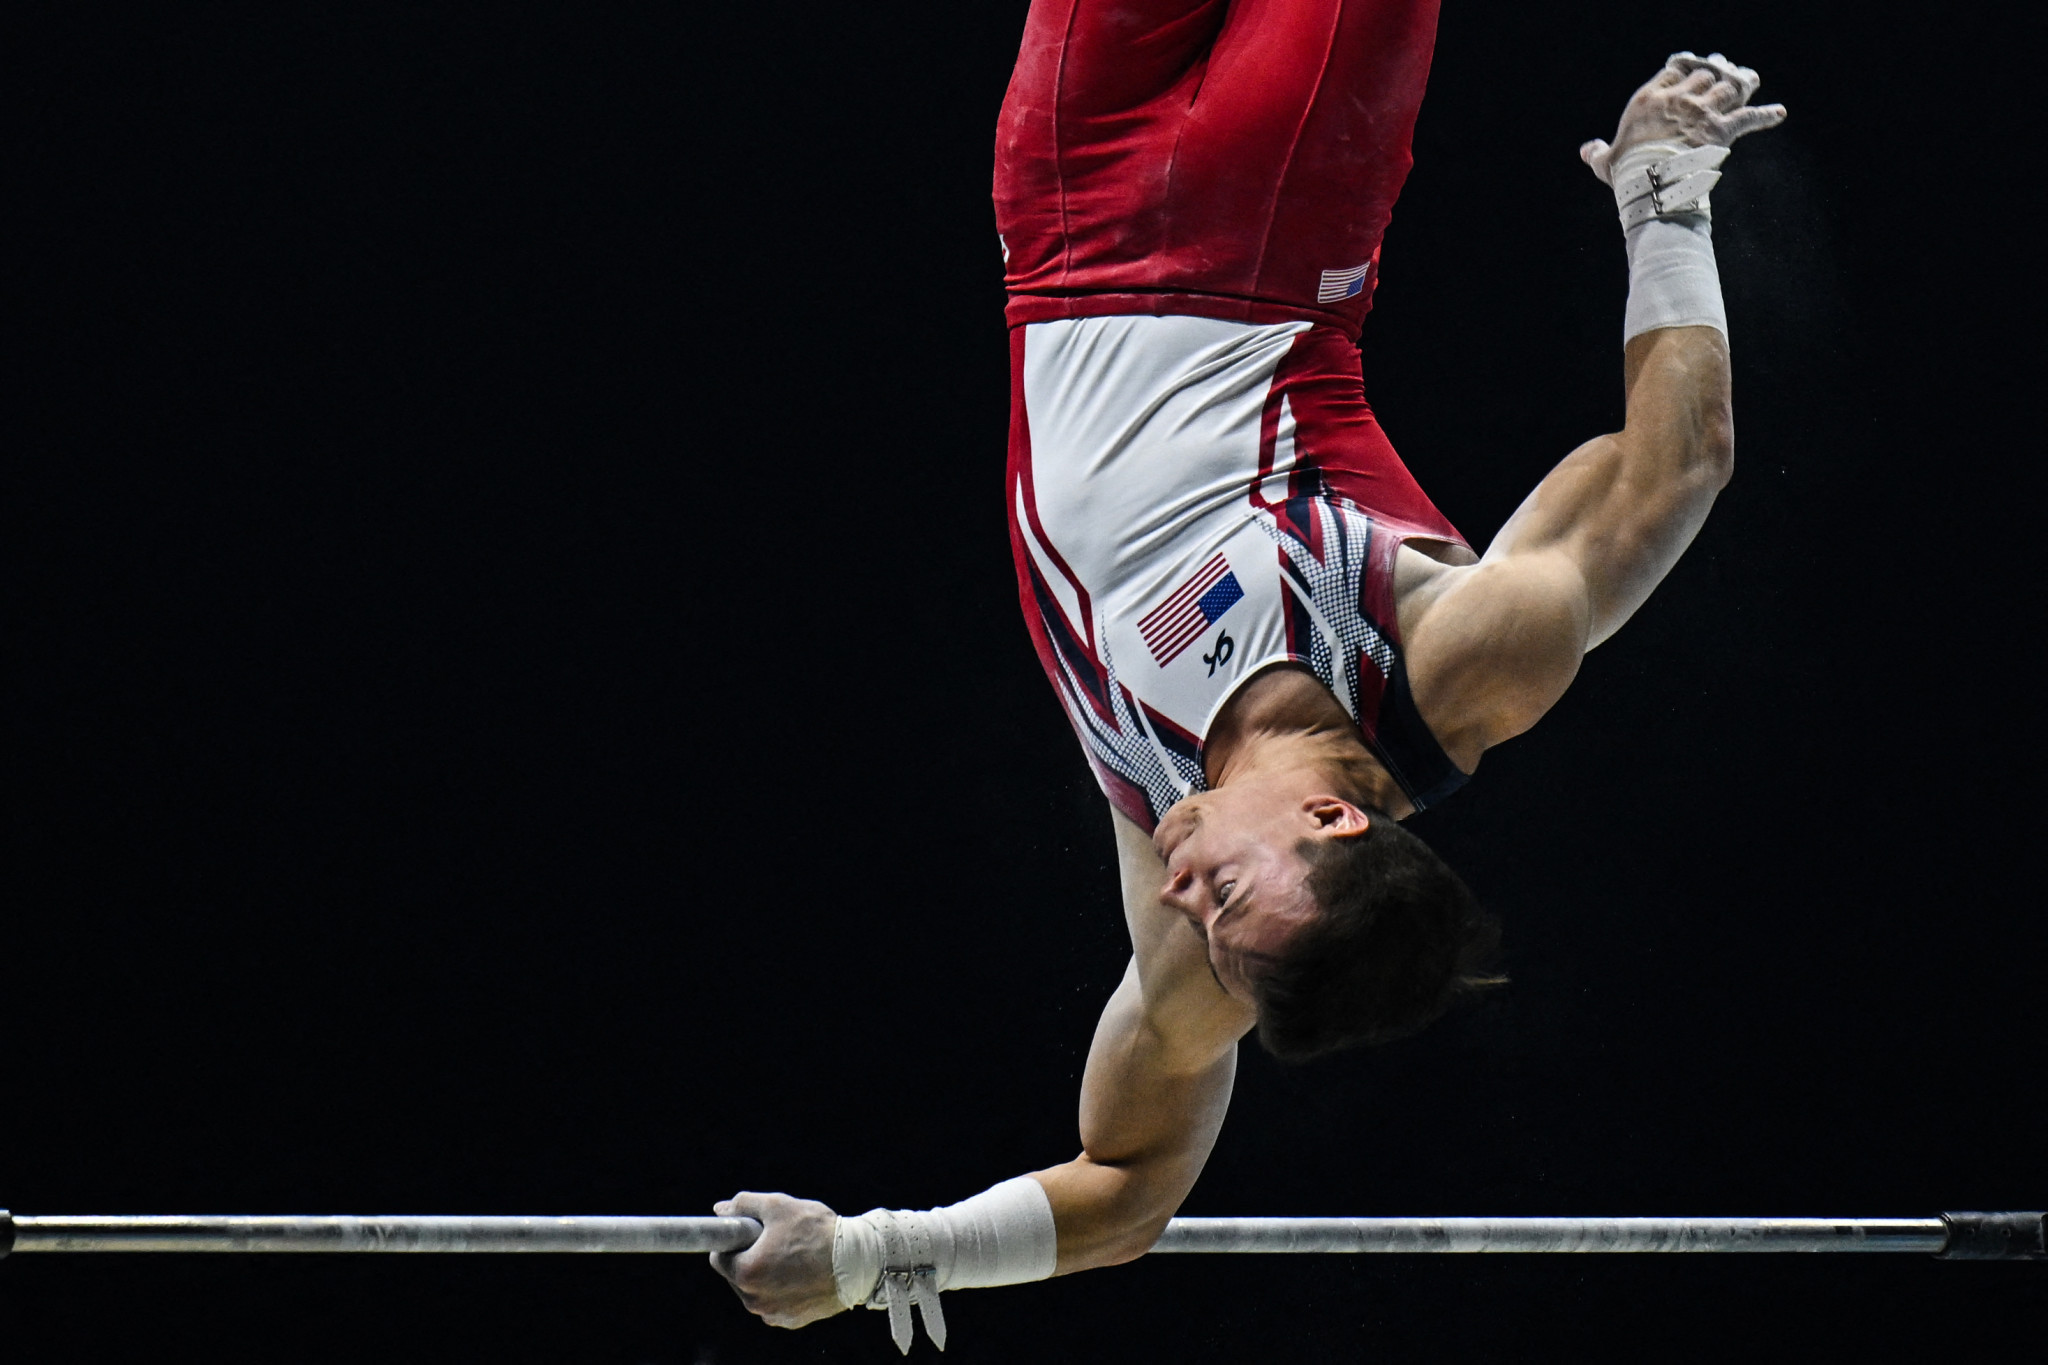 Brody Malone won the United States' third gold at the 2022 World Artistic Gymnastics Championships ©Getty Images